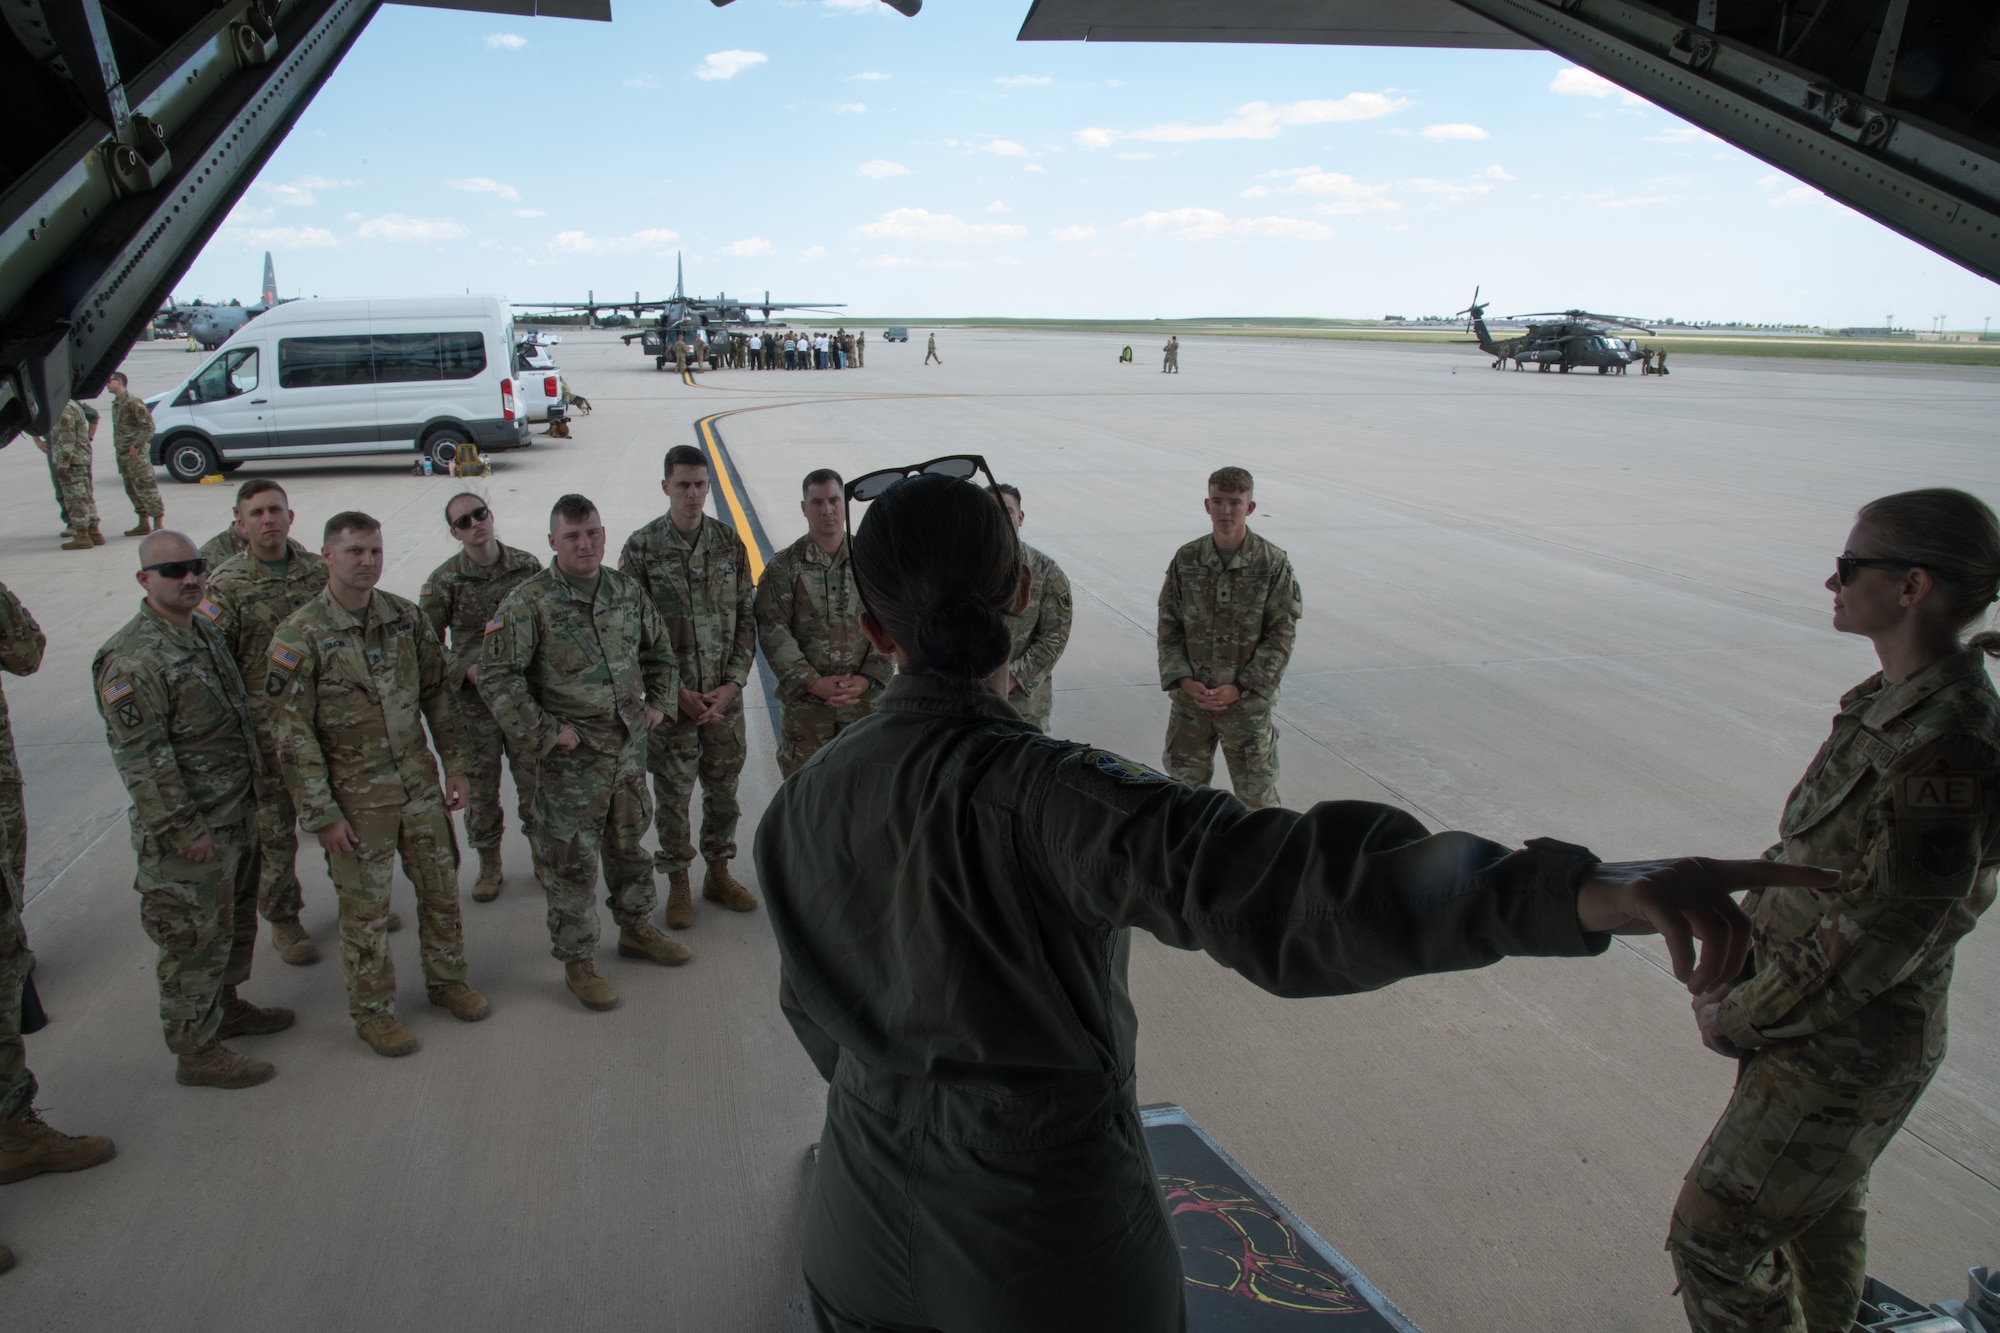 A servicemember in a flight suit points behind her inside of a C-130 aircraft on the flight line while soldiers listen to her. Airmen and soldiers stand near two helicopters in the background.